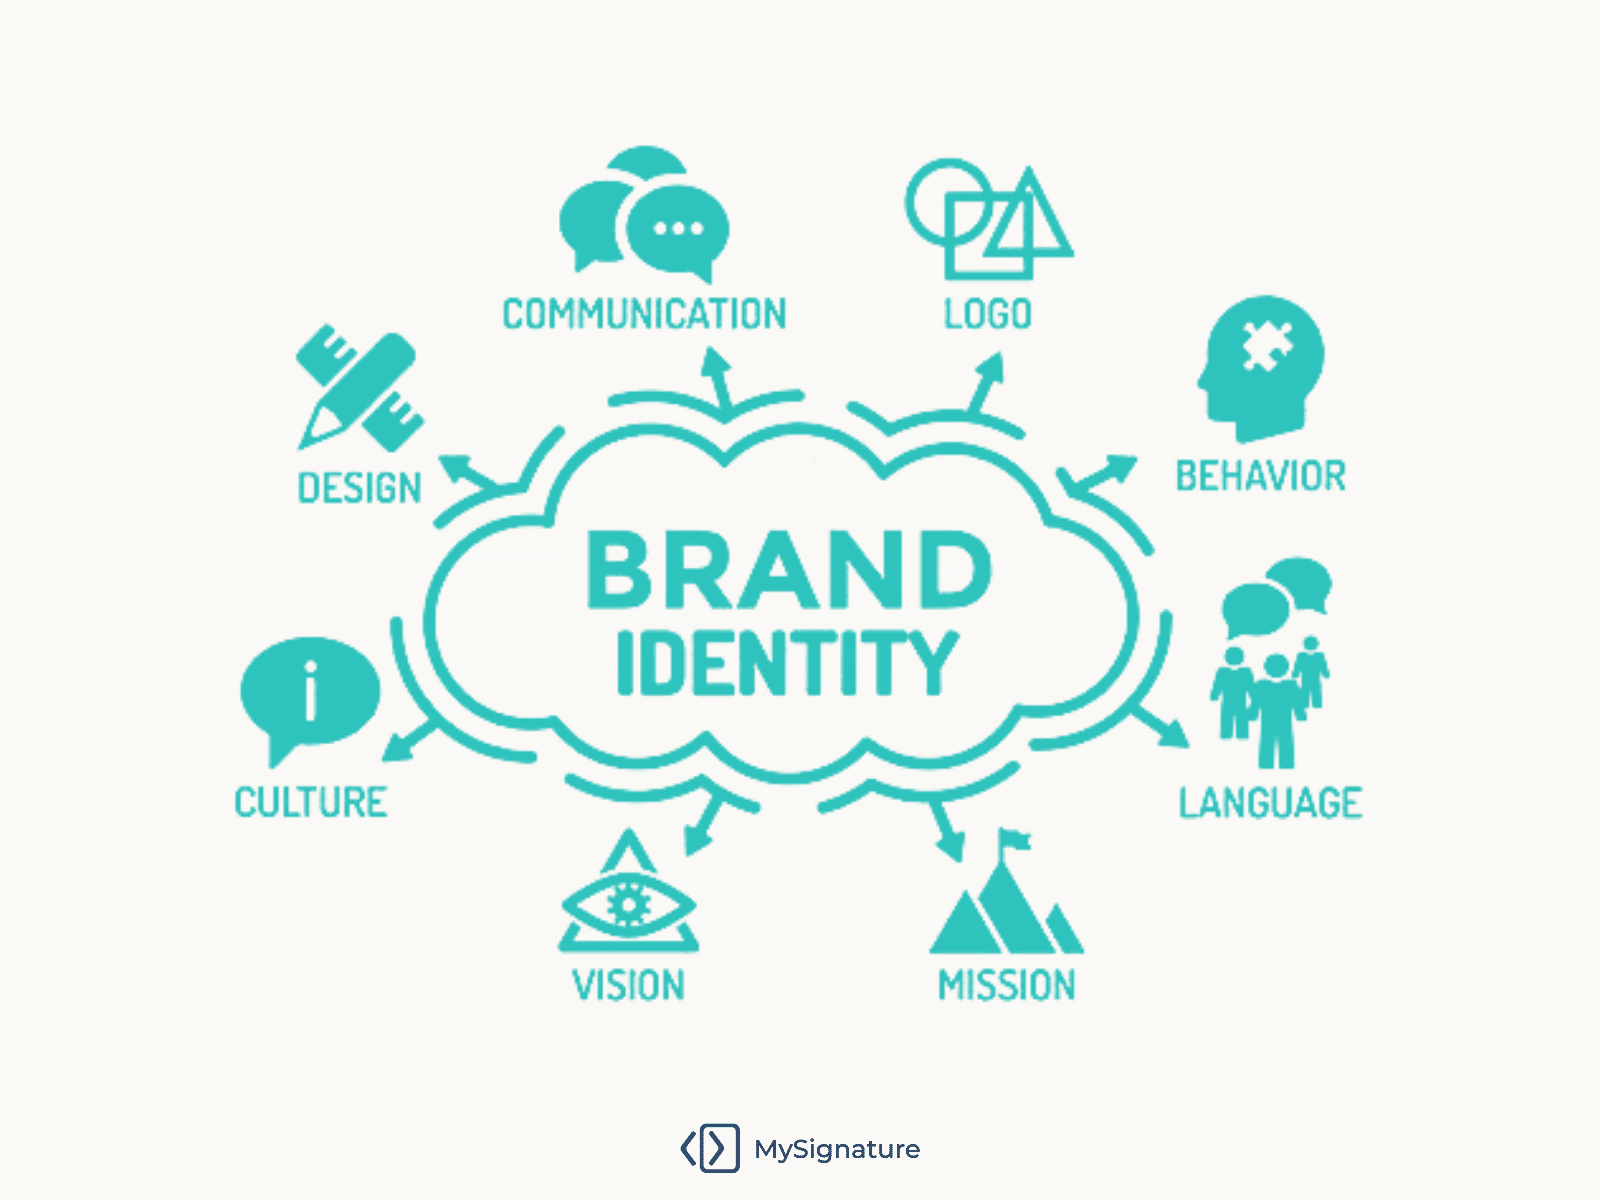 Business Growth Starts With Creating A Strong Brand Identity